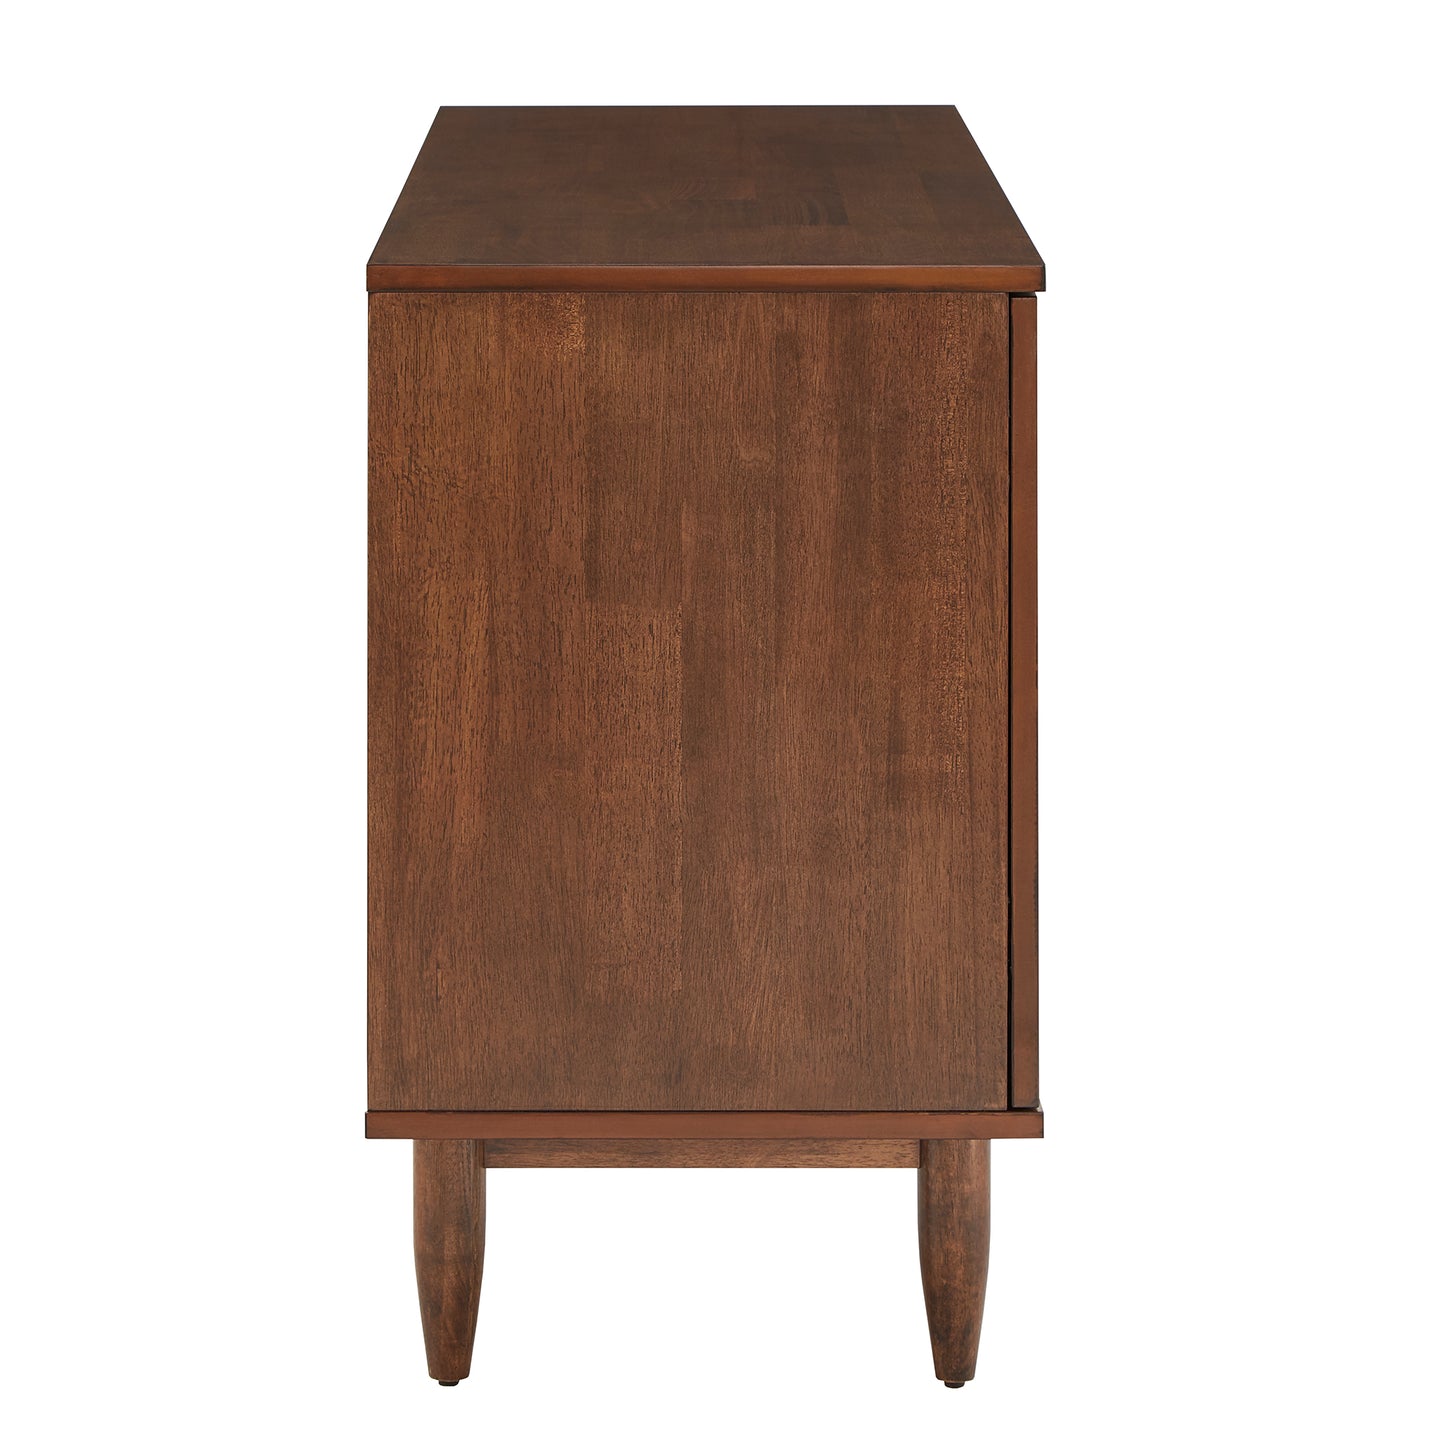 Mid-Century Wood 2-Door and 3-Drawer Server - Brown Finish